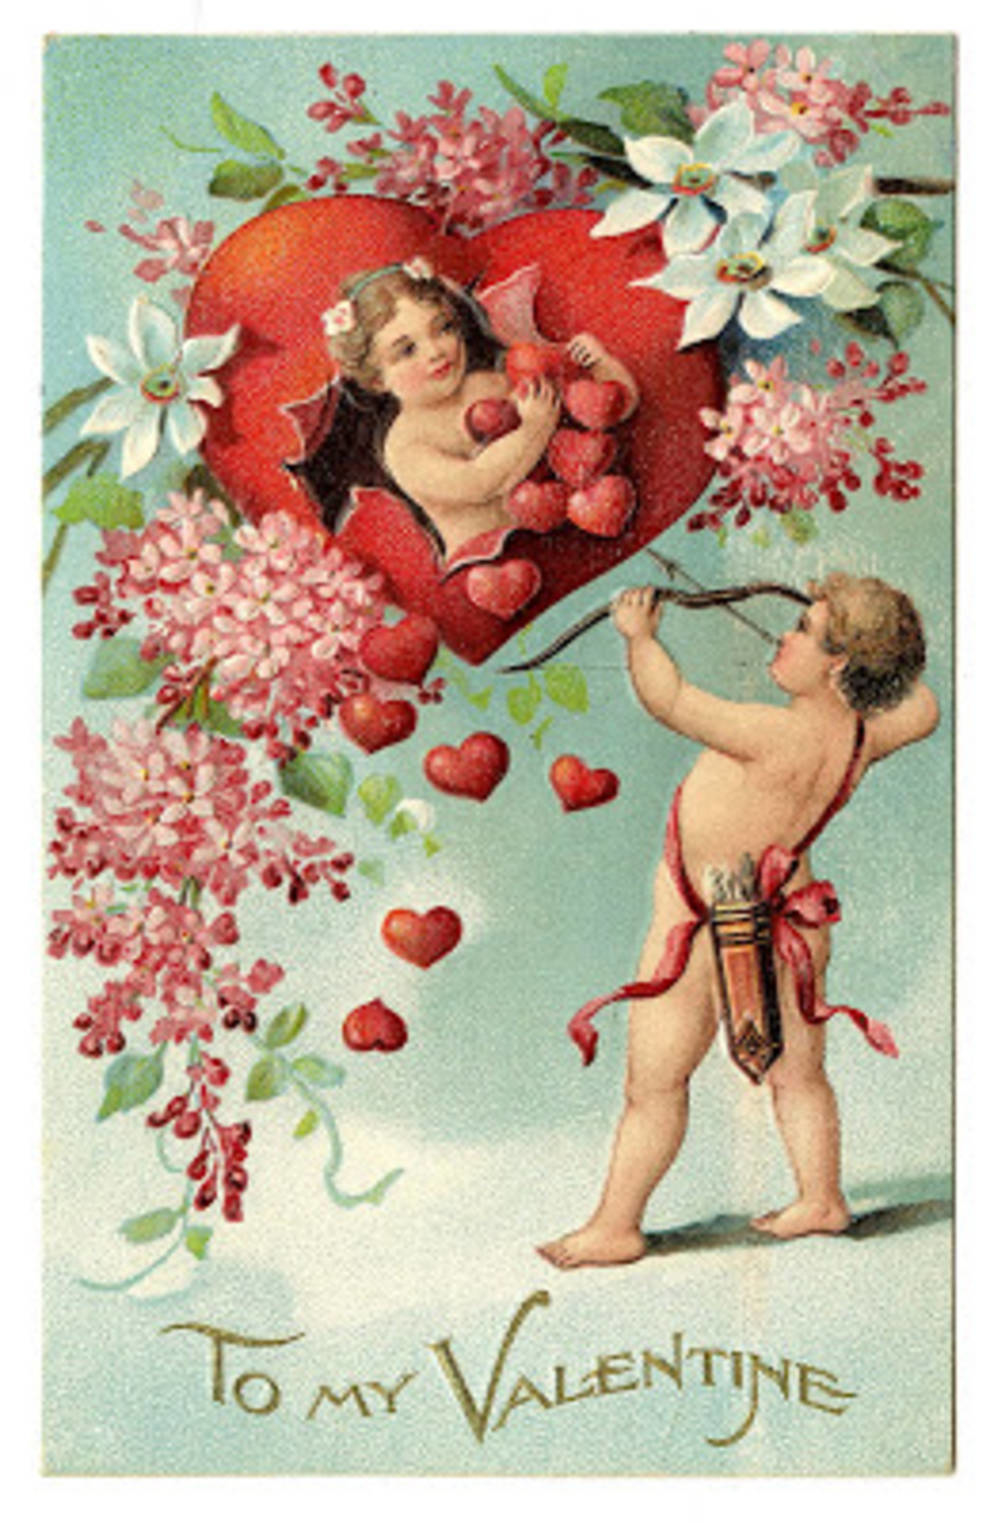 A selection of vintage photos for Valentine's Day